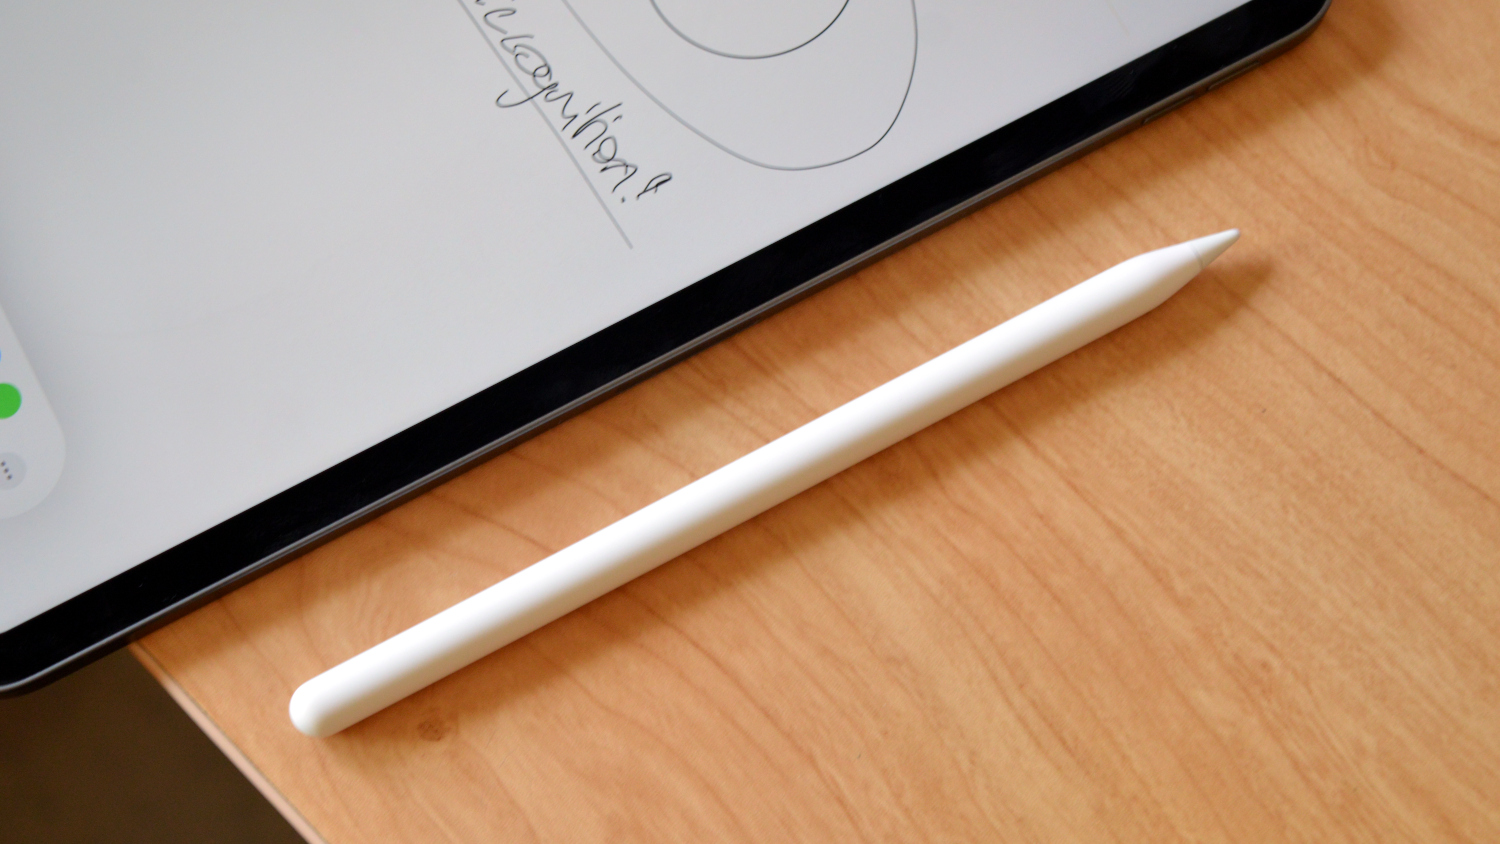 Samsung S Pen is better than Apple Pencil, but it's not enough